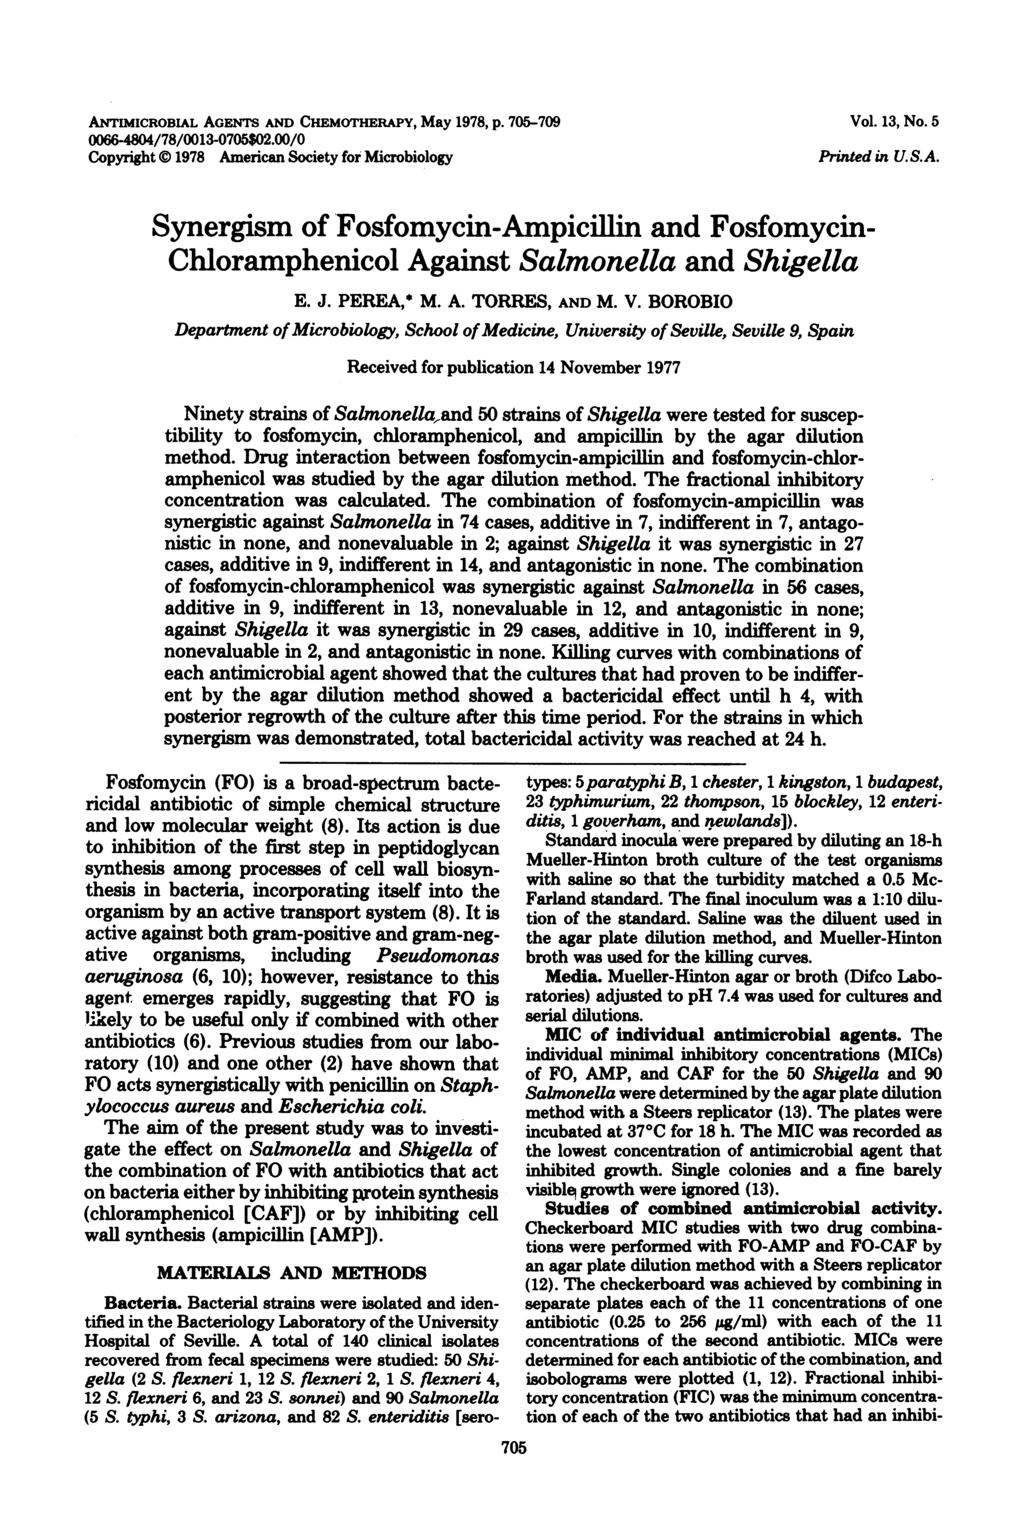 ANTIMICROBiAL AGENTS AND CHEMoTHERAPY, May 1978, p. 75-79 66-484/78/13-75$2./ Copyright 1978 American Society for Microbiology Vol. 13, No. 5 Printed in U.S.A. Synergism of Fosfomycin-Ampicillin and Fosfomycin- Chloramphenicol Against Salmonella and Shigella E.